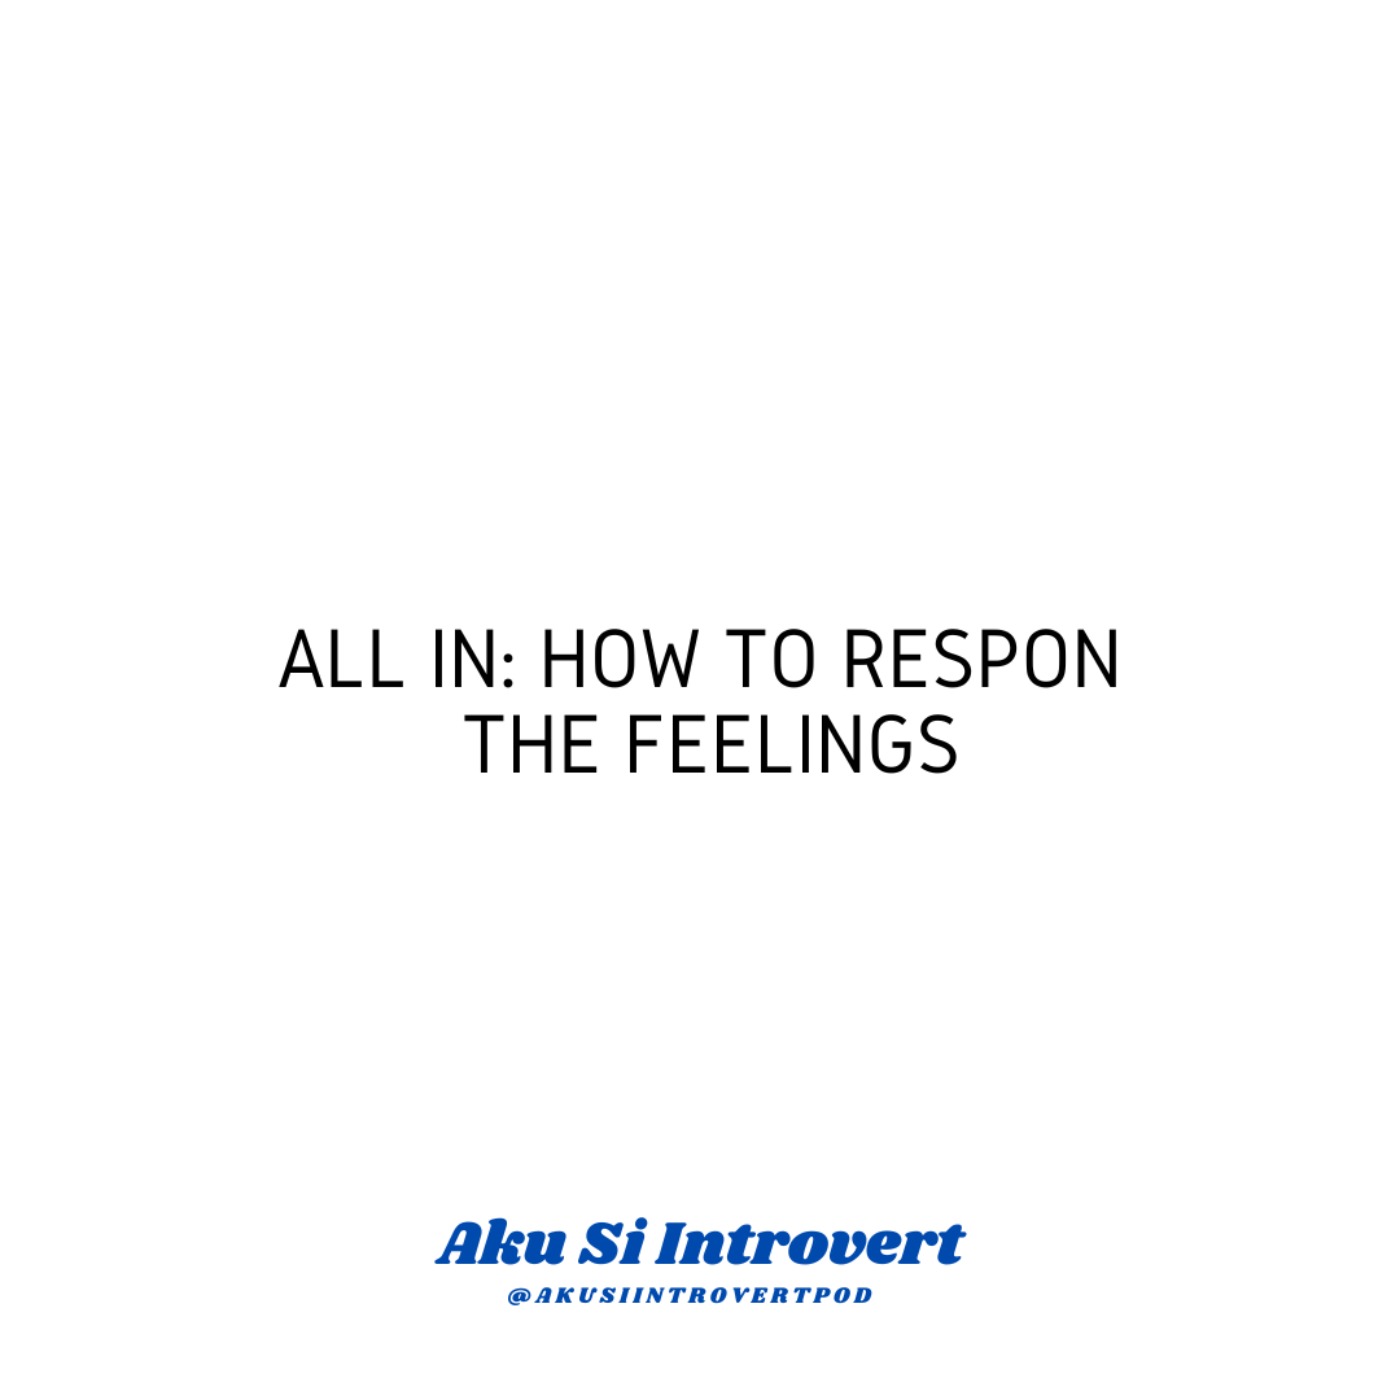 All In: How to Respon the Feelings